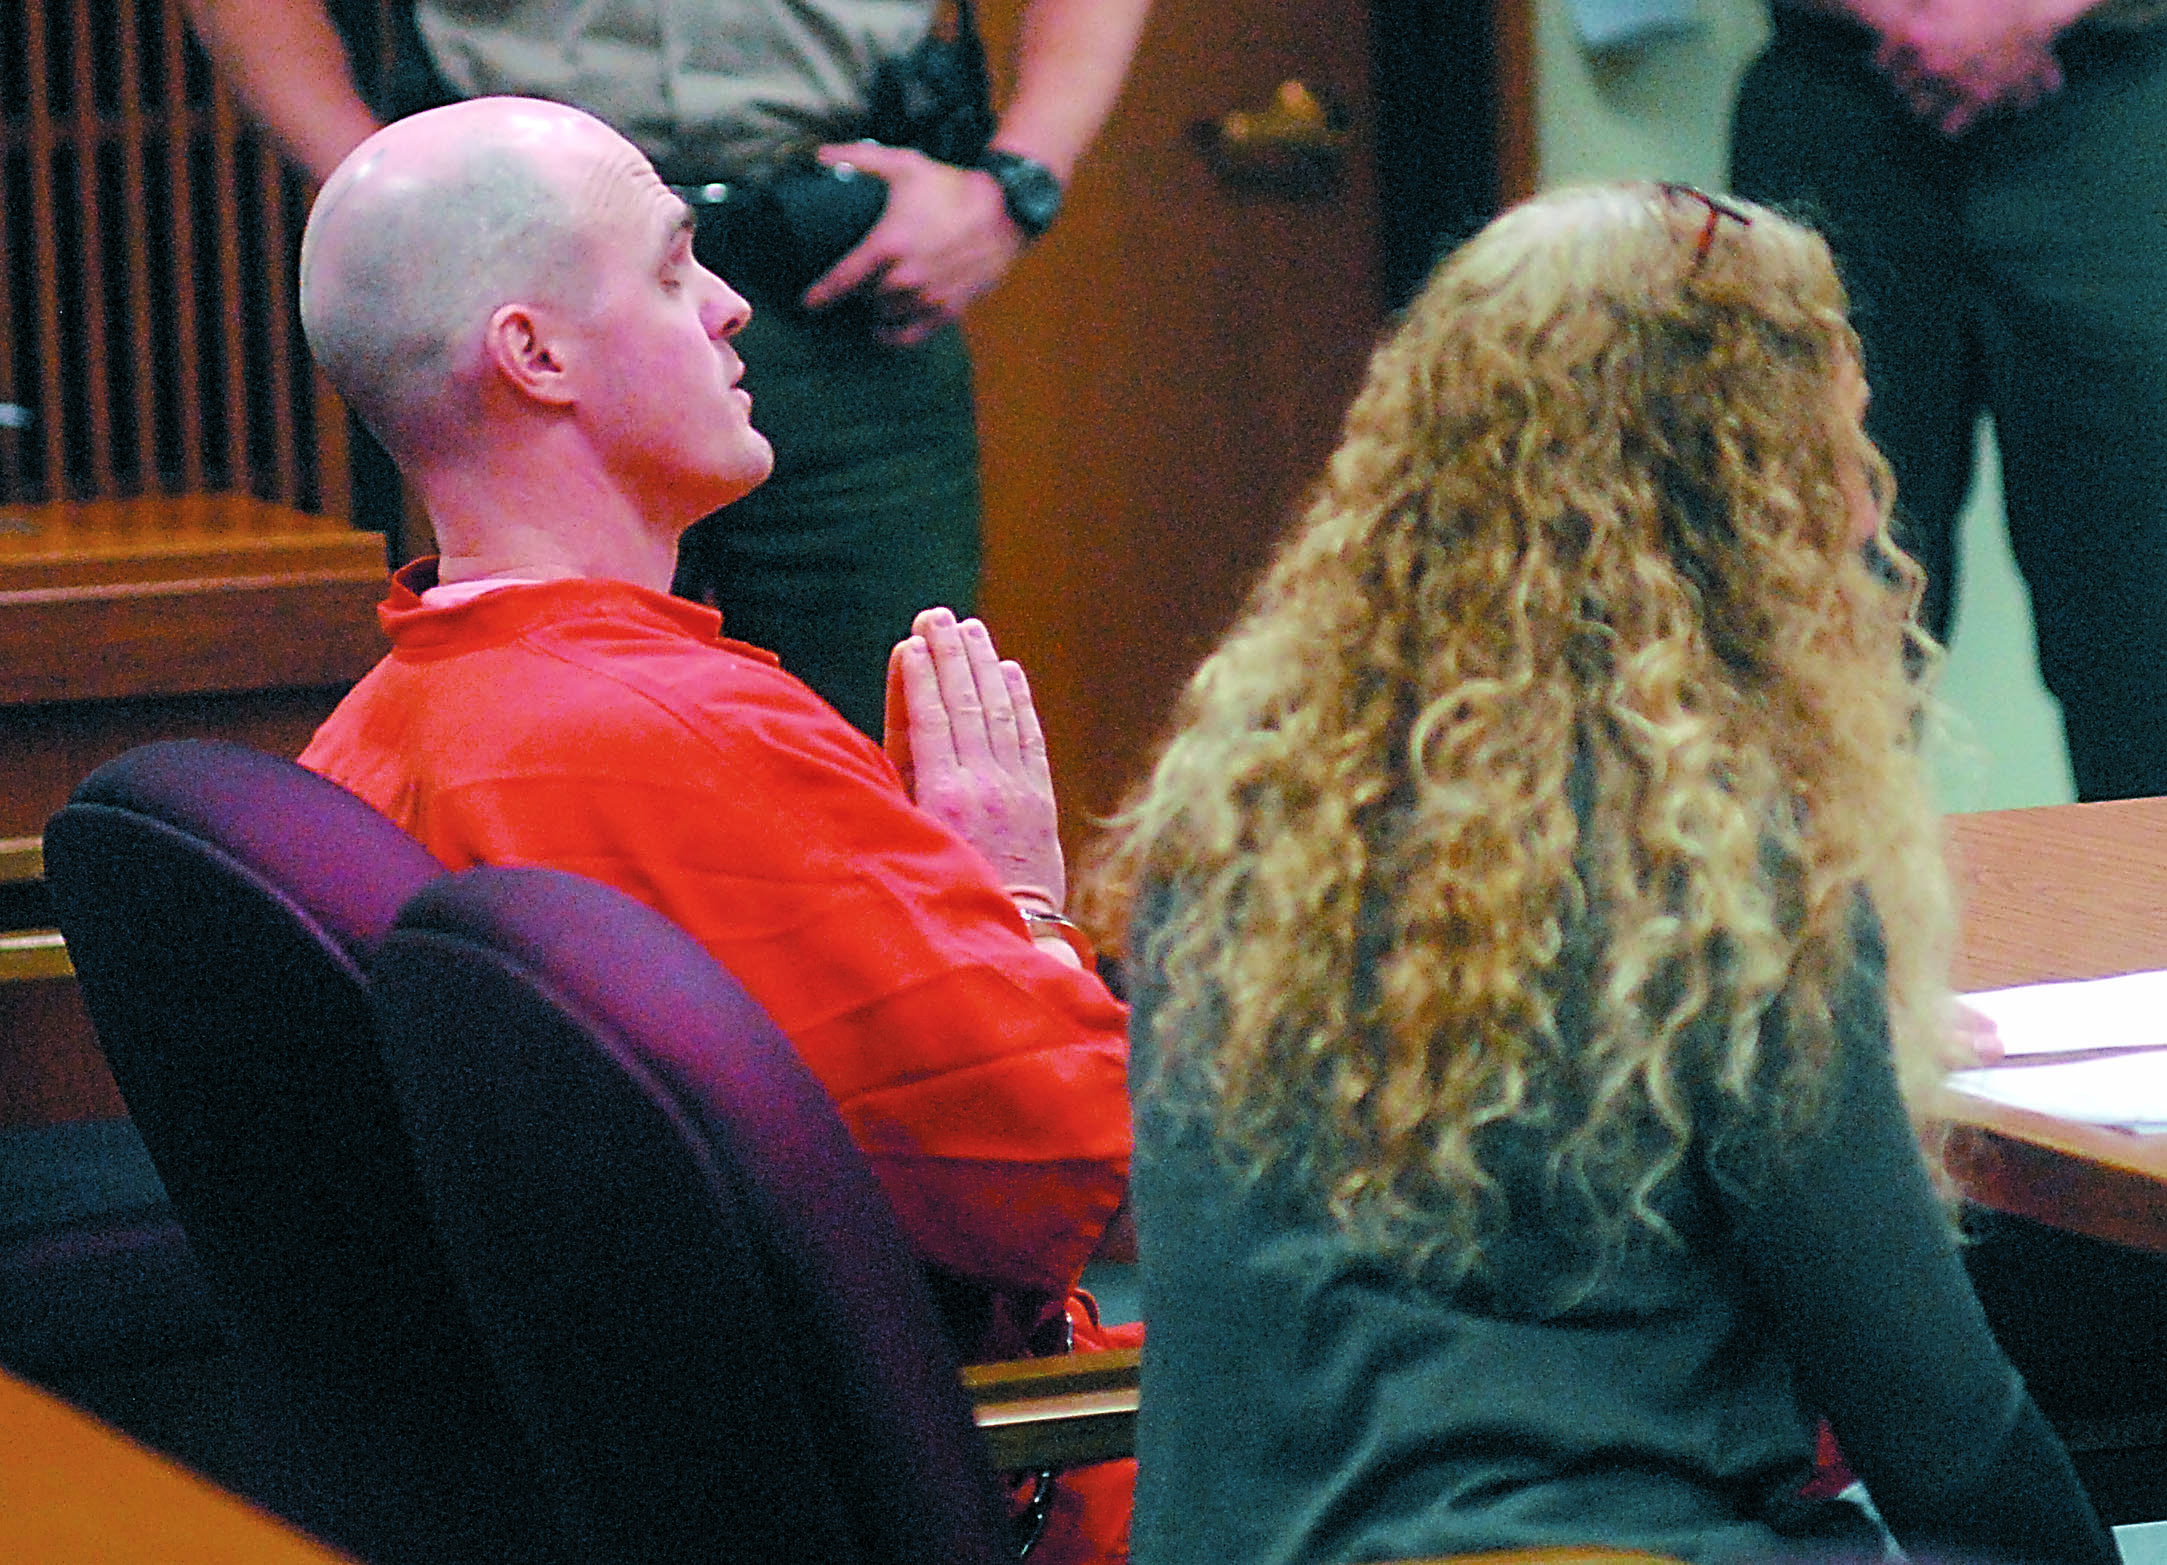 Patrick B. Drum appears at his arraignment in Clallam County Superior Court